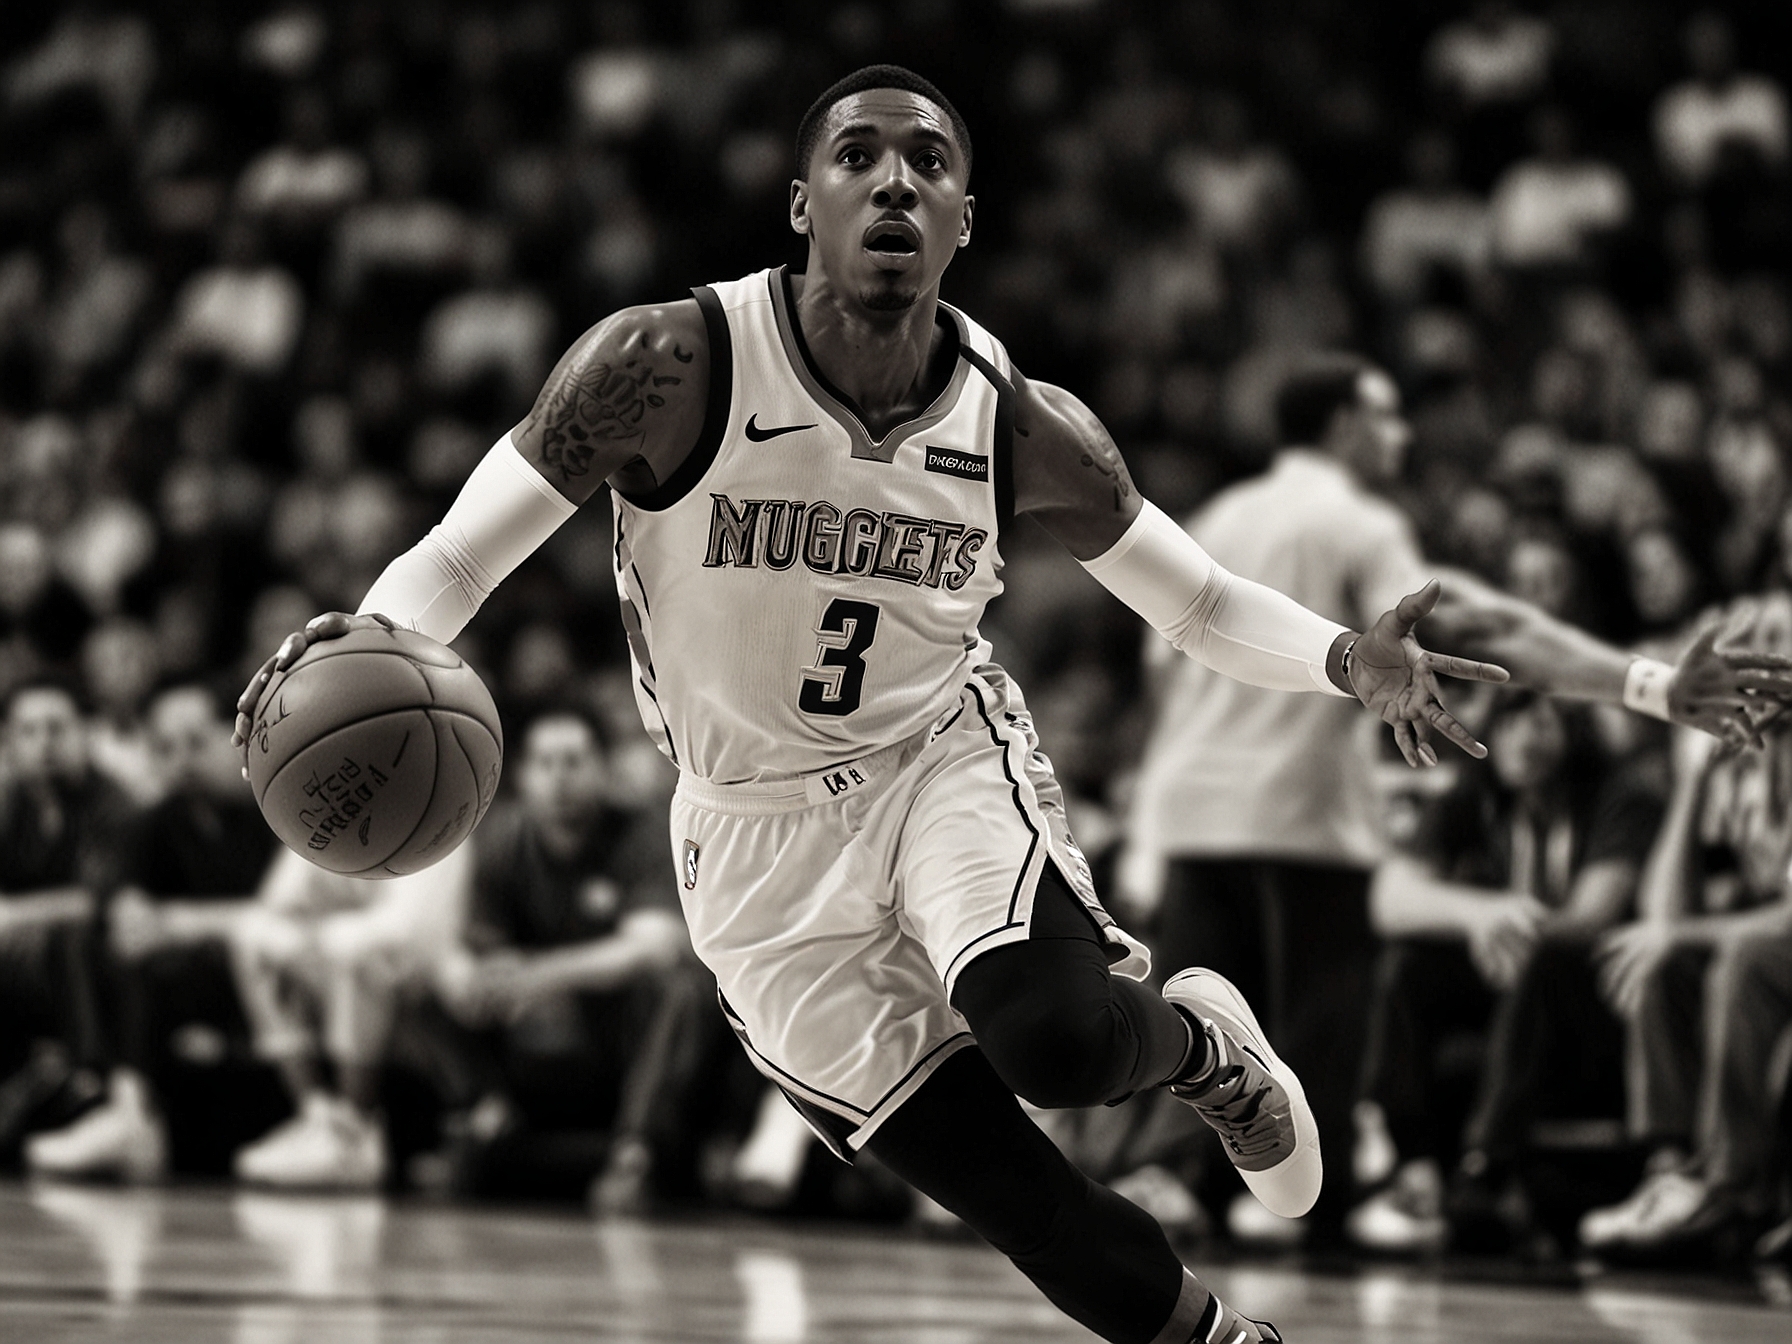 Kentavious Caldwell-Pope, in a Denver Nuggets jersey, executing a defensive play during an NBA game. His defensive skills could be crucial for the Philadelphia 76ers’ backcourt.